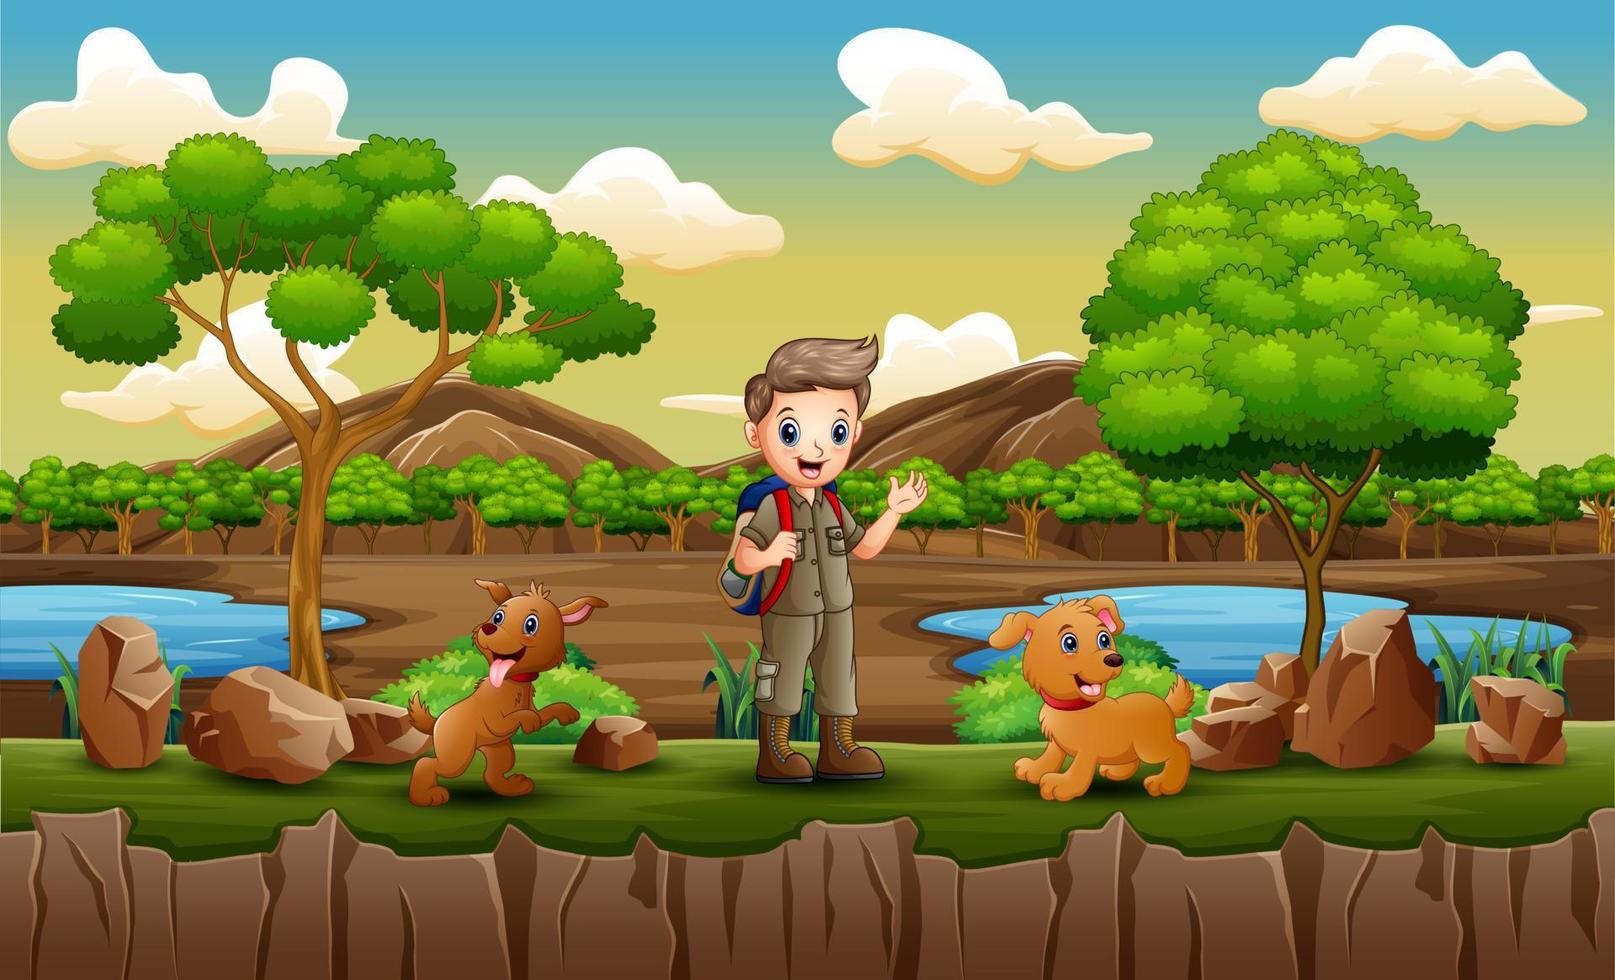 Park scene with scout boy exploring outdoors vector